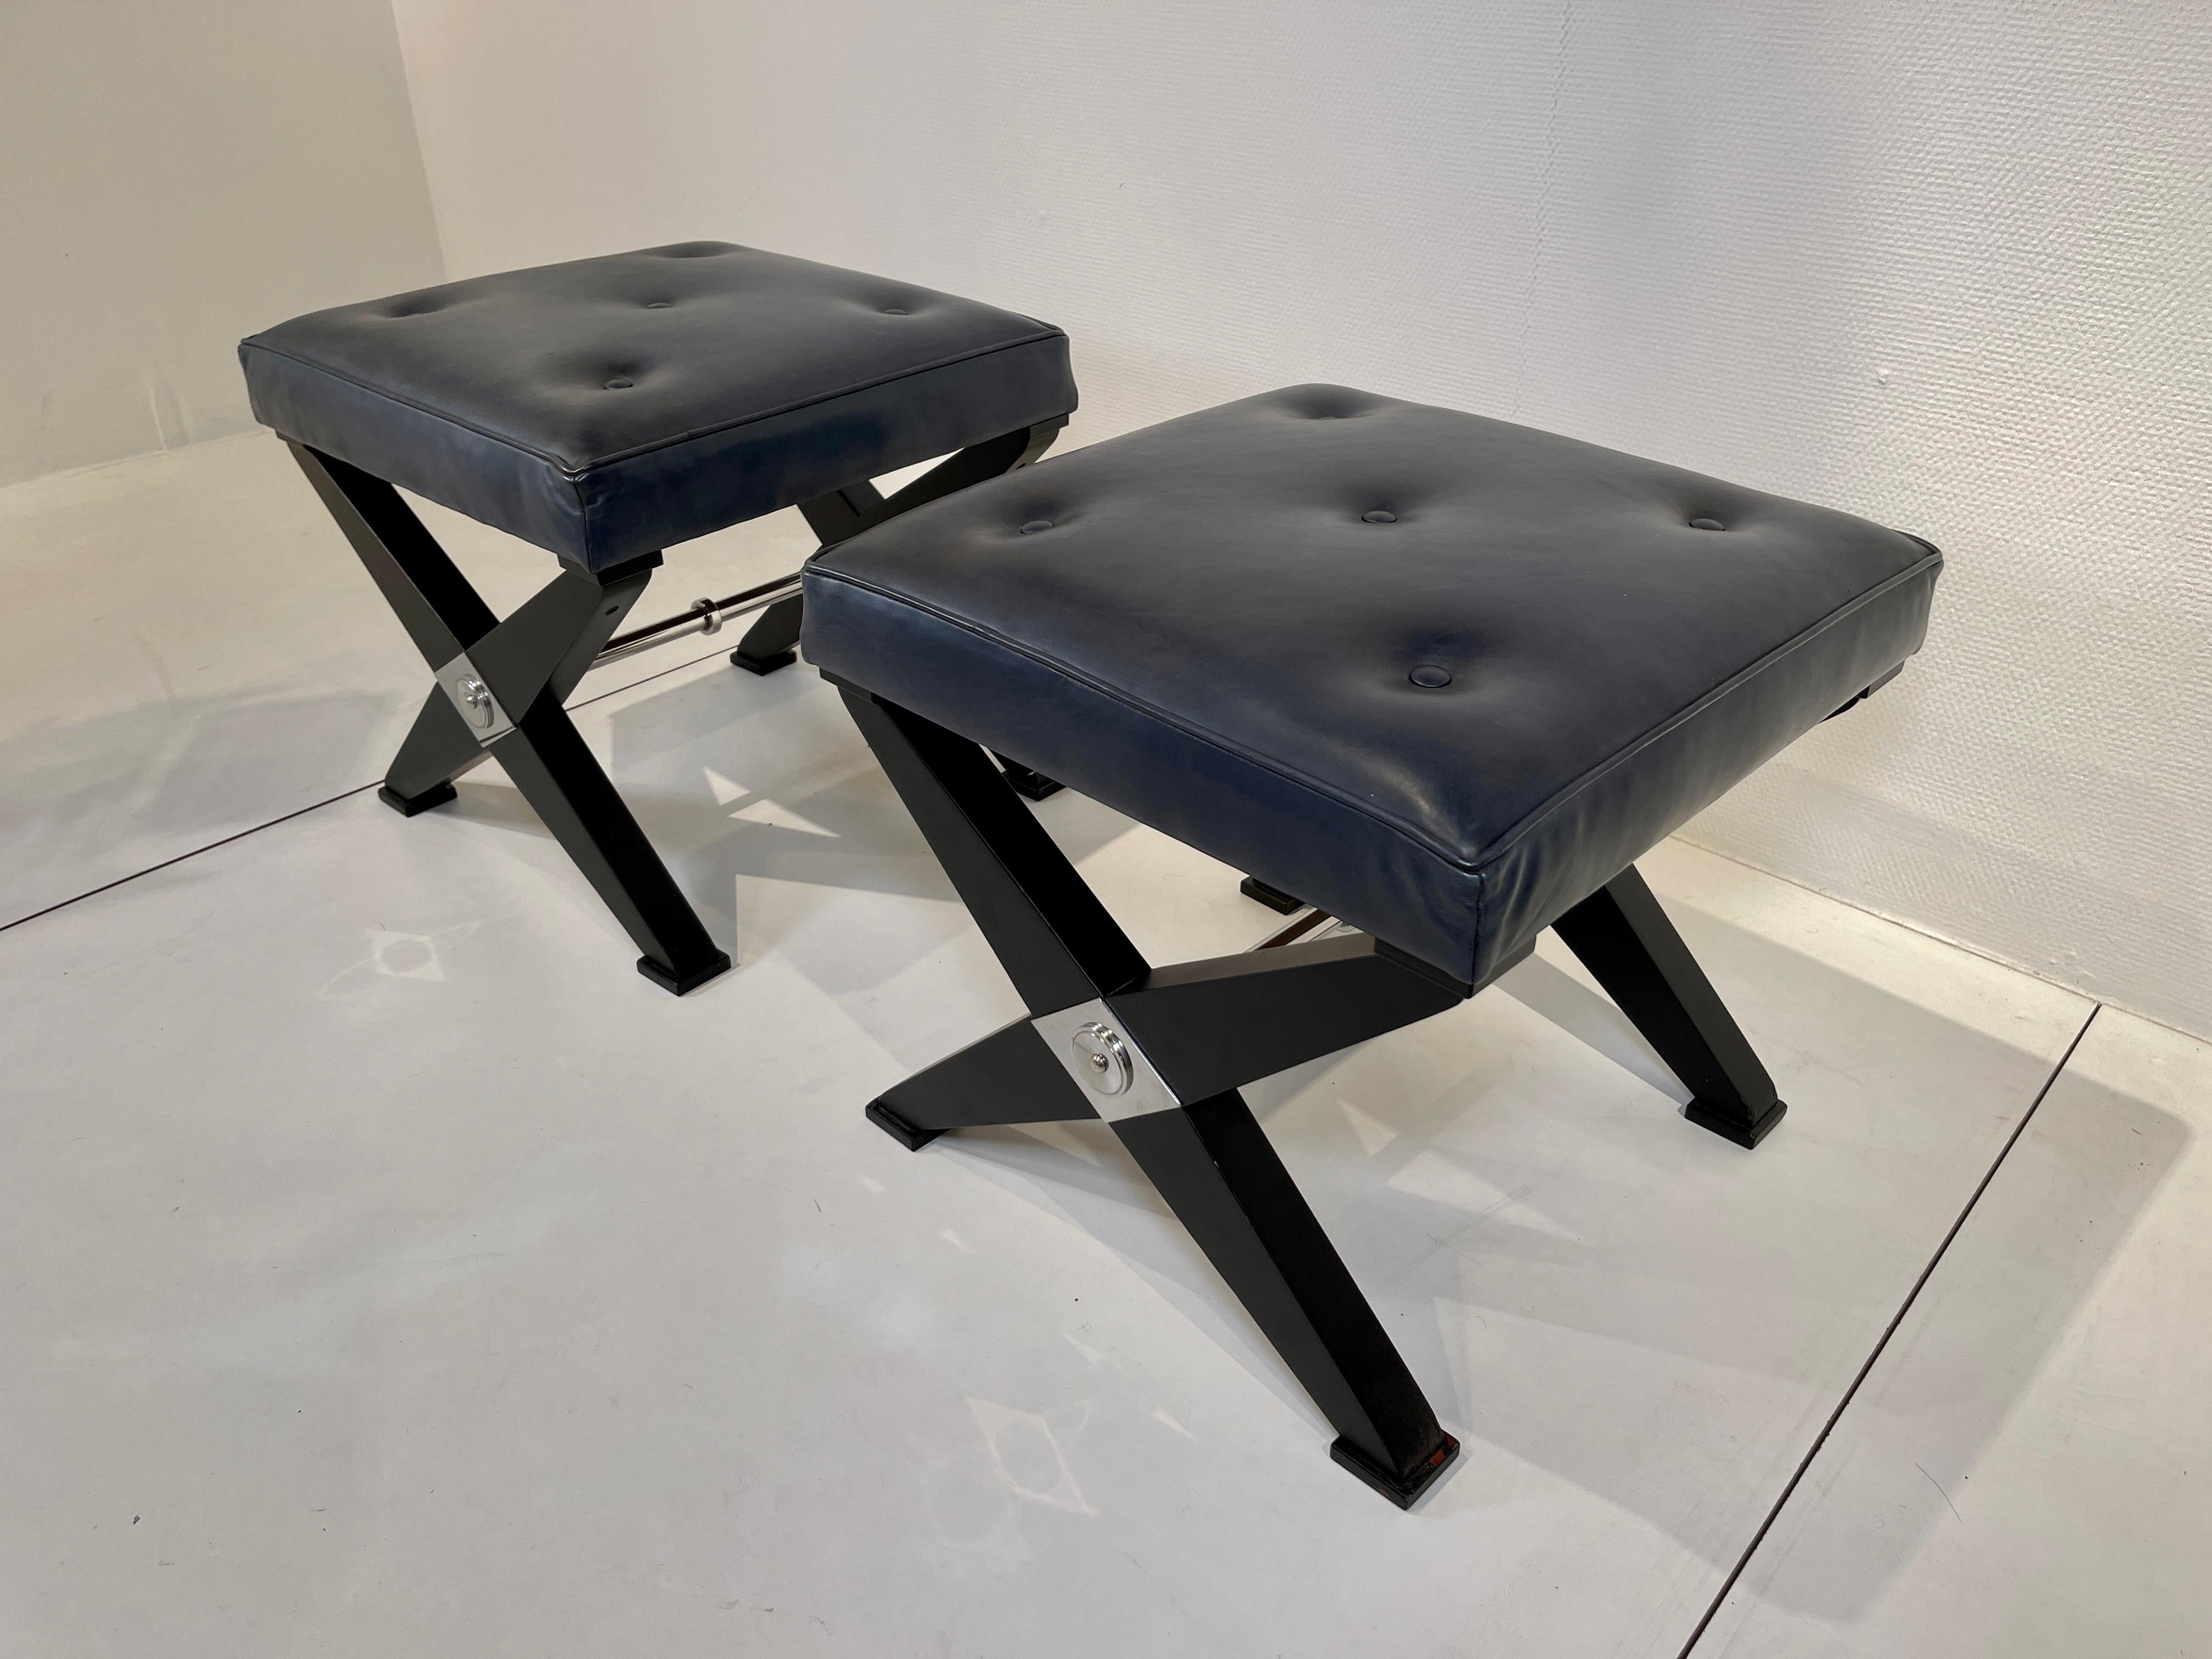 Pair of stool (footstools) full repair, new lacquered, new lining leather, and refresh metal (chrome). from France circa 1960.